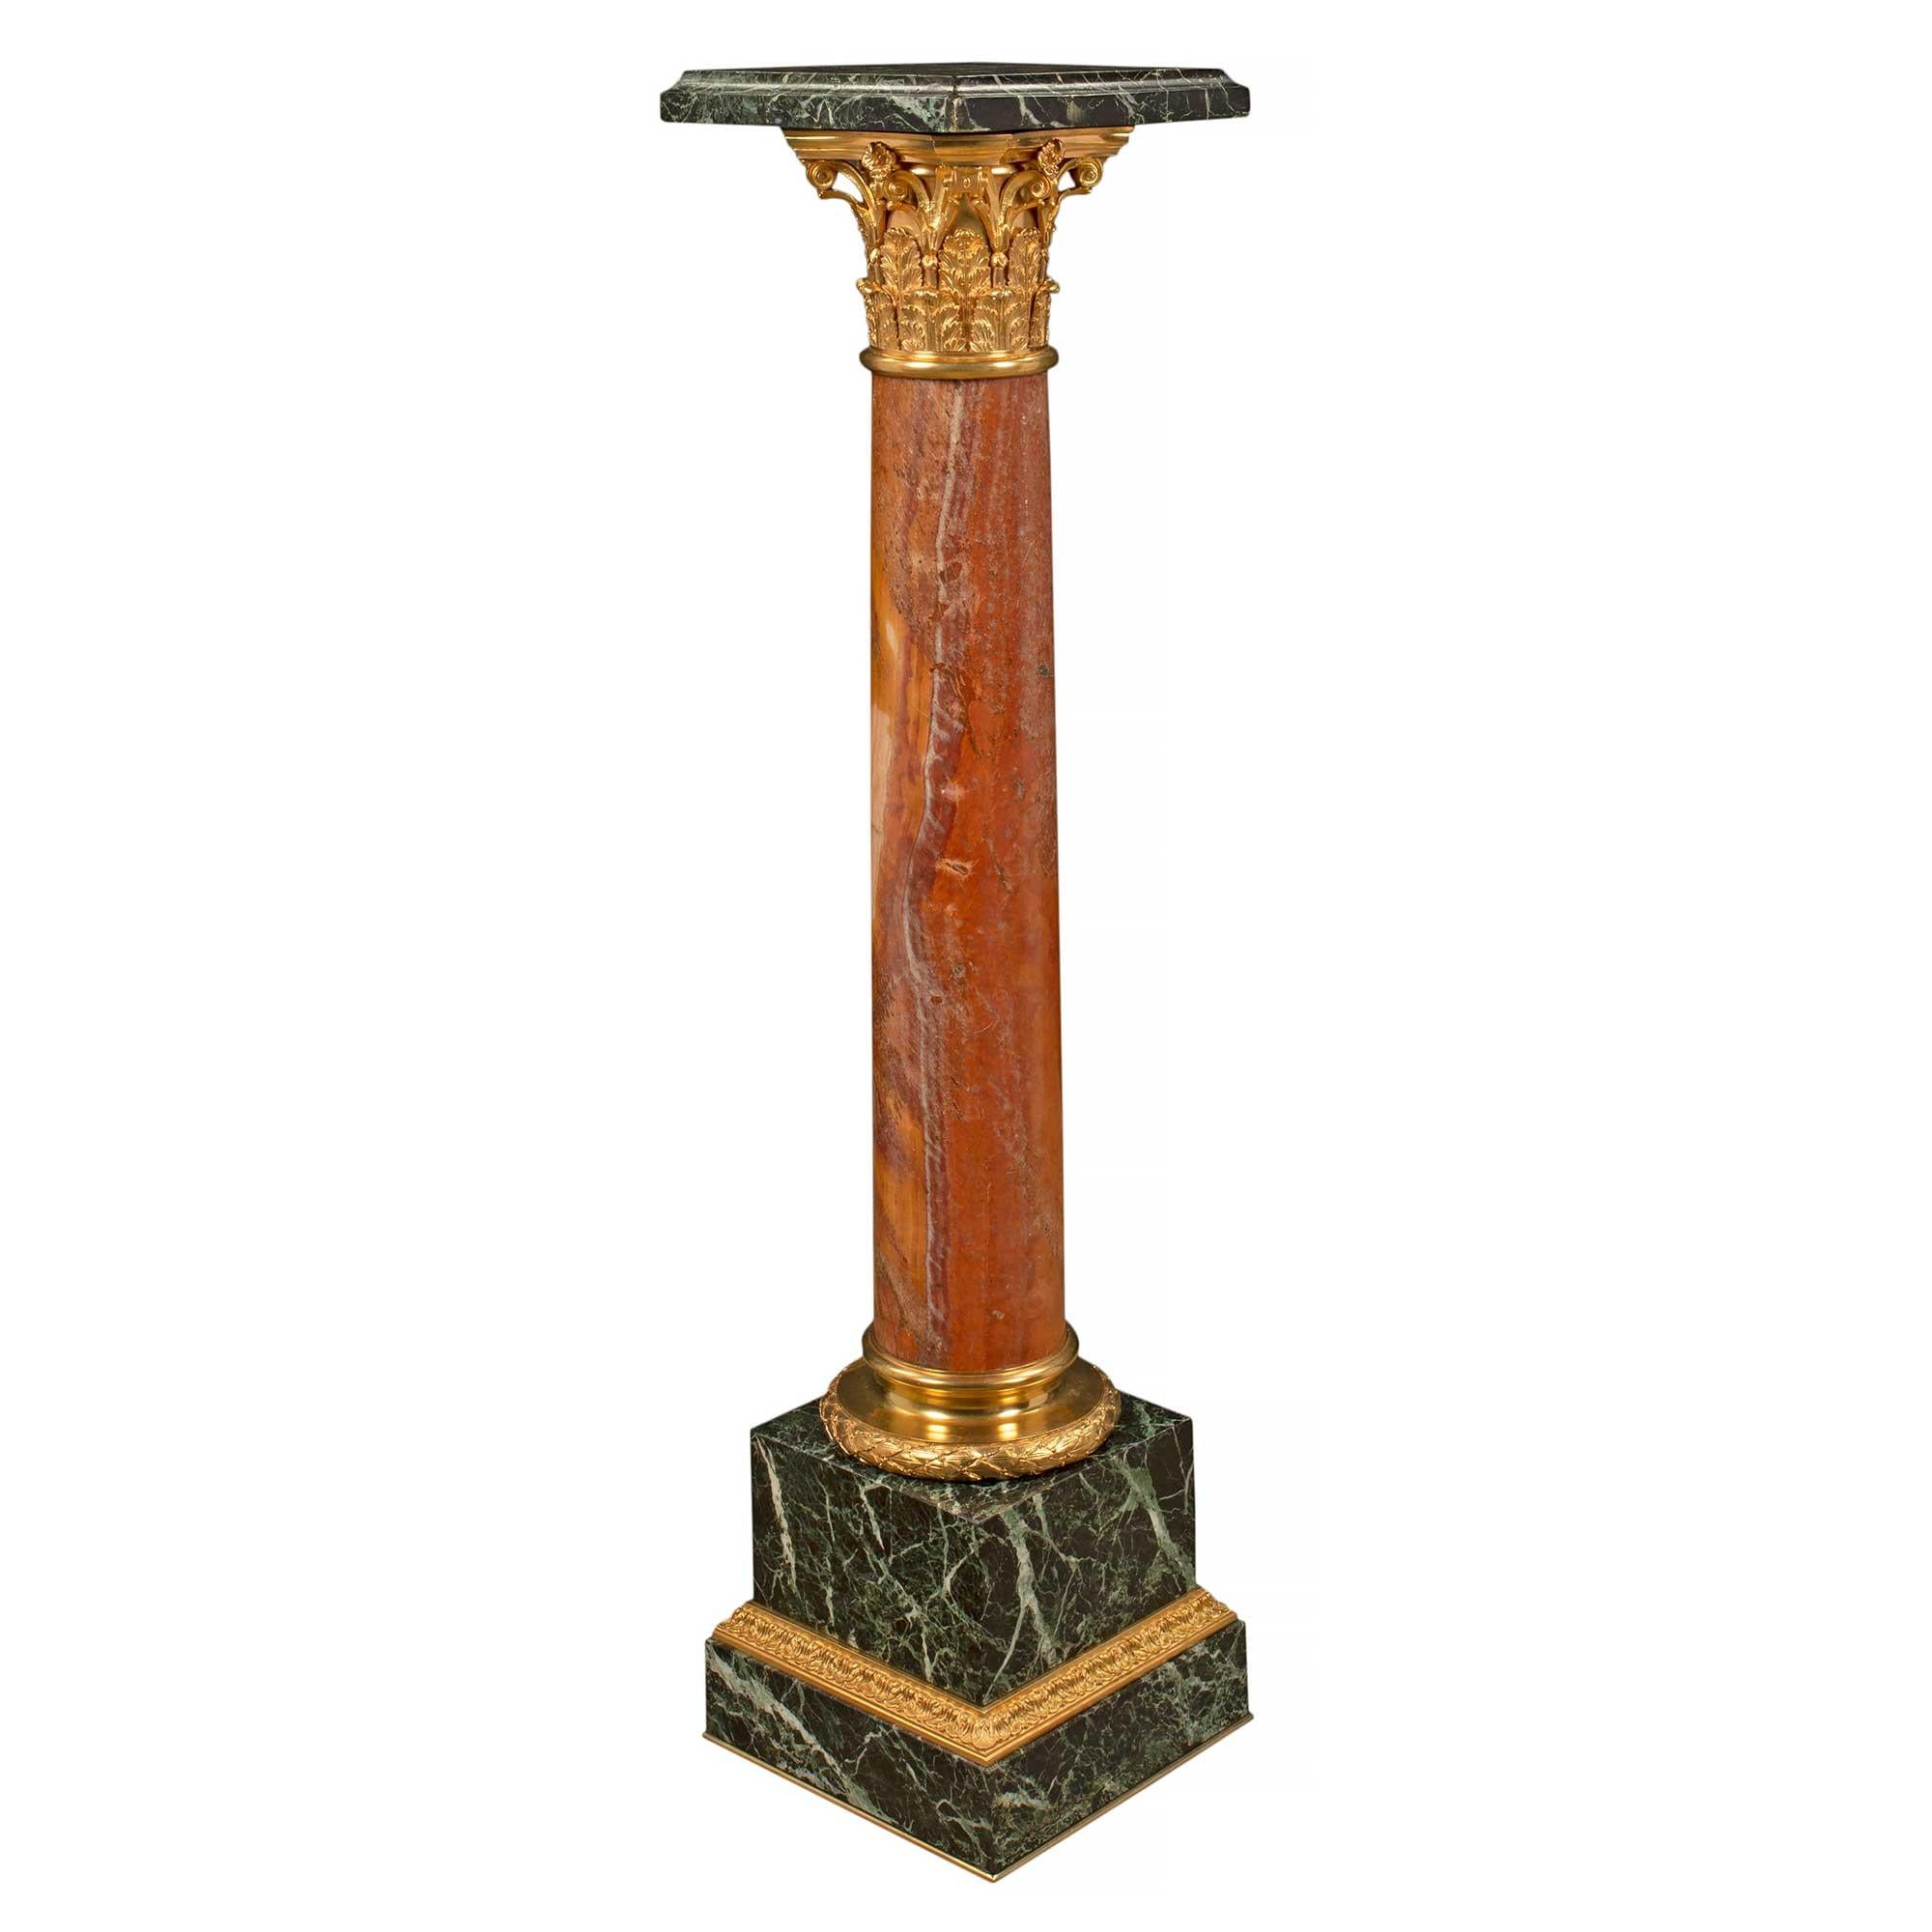 French Mid-19th Century Louis XVI Style Pedestal Column in Marble and Ormolu In Good Condition For Sale In West Palm Beach, FL